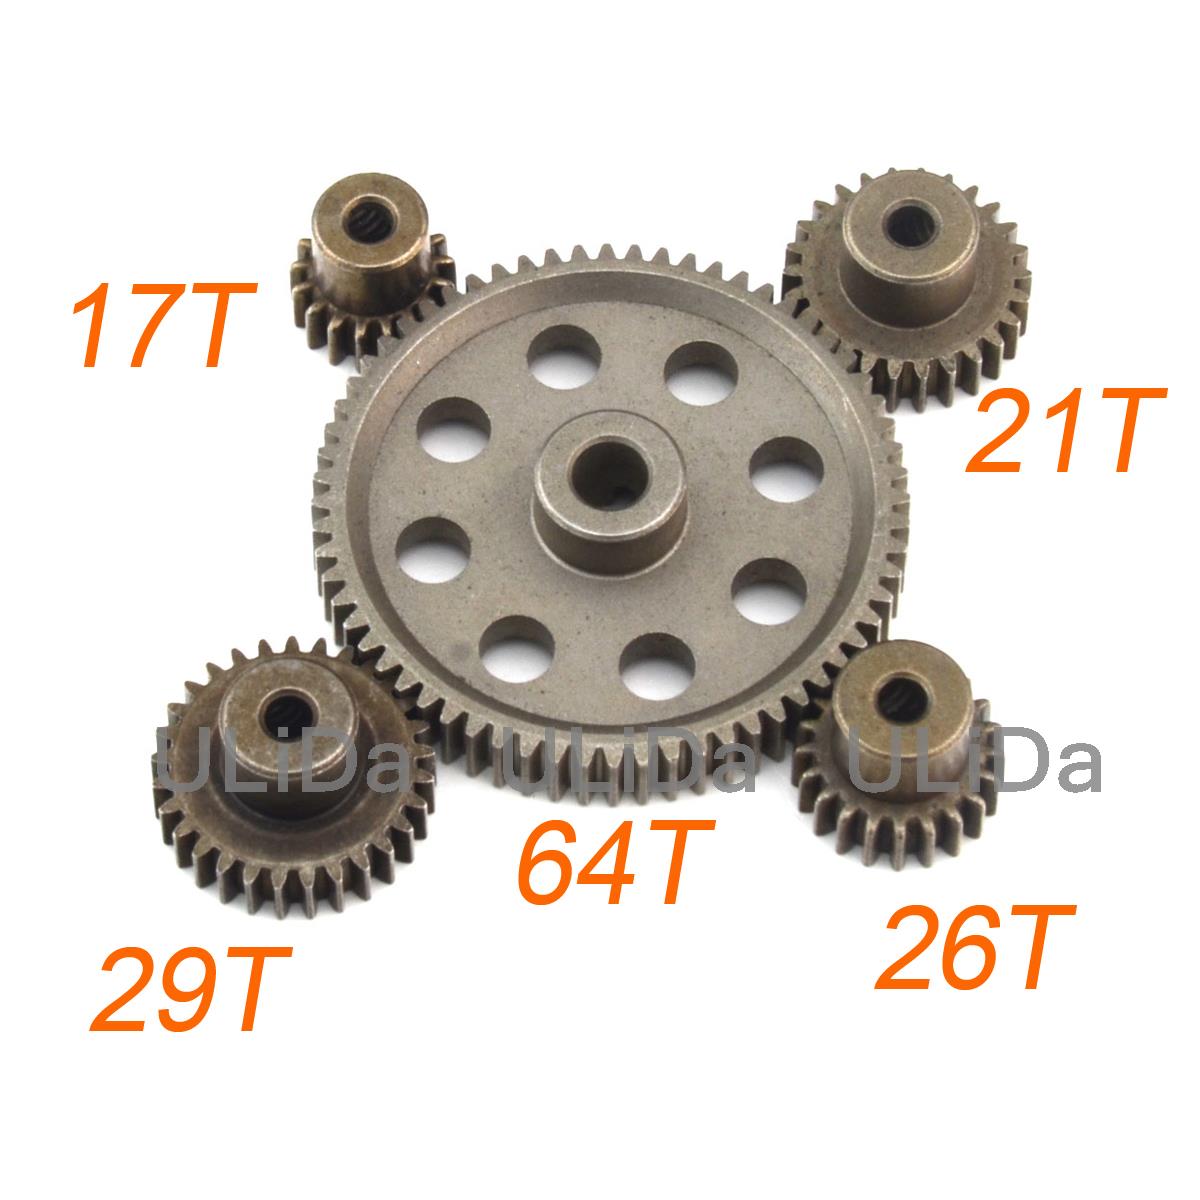 64T Differential Motor Gear Diff For RC 1/10 HSP Model Car 11184 Spare Parts 